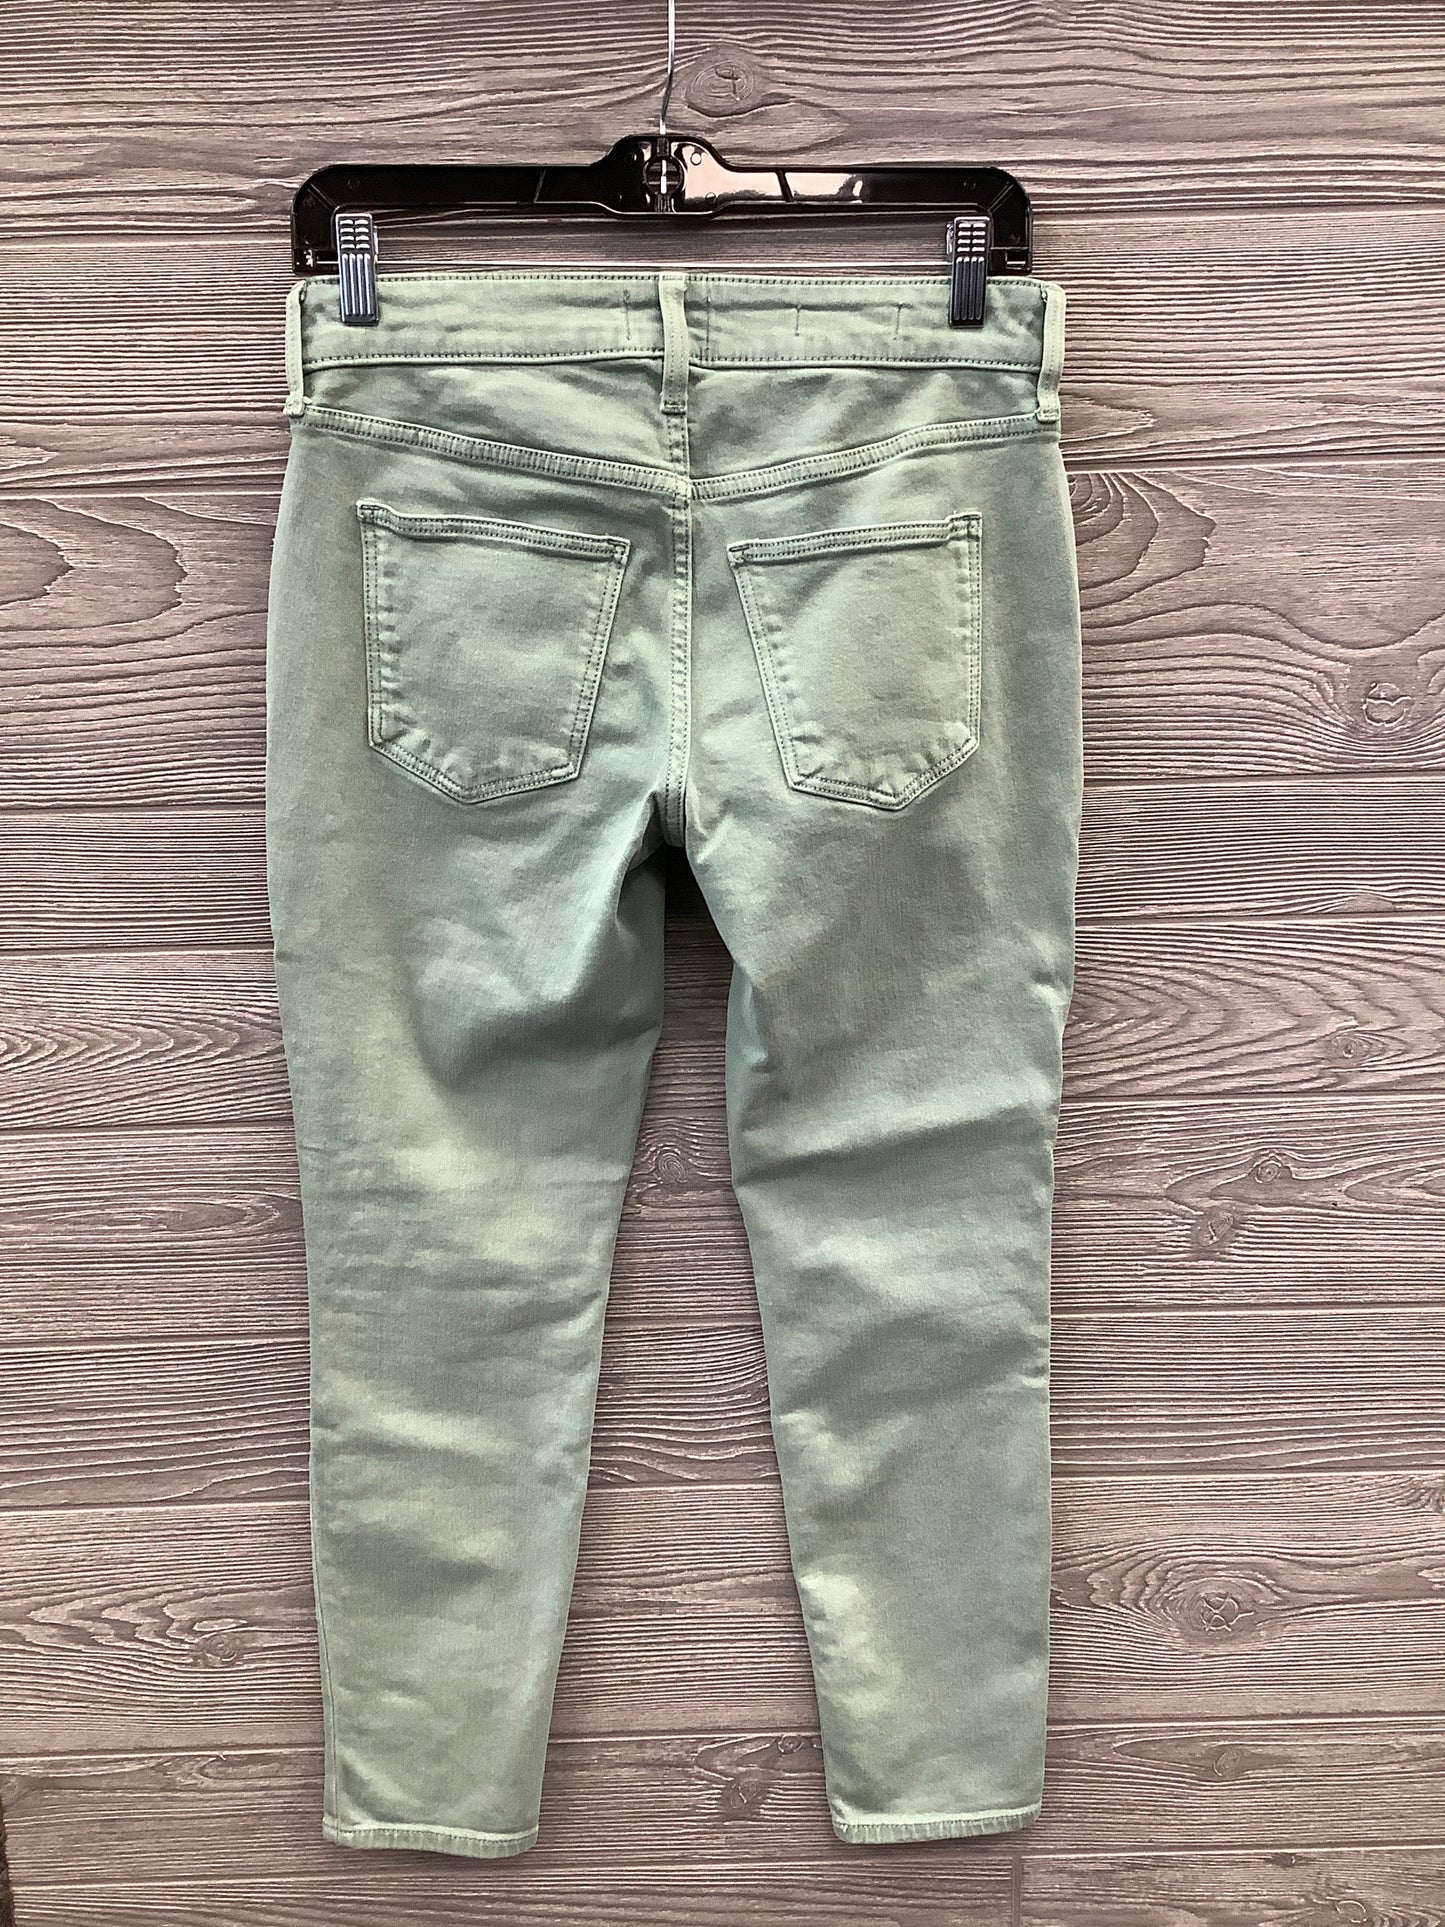 Jeans Skinny By Universal Thread  Size: 2